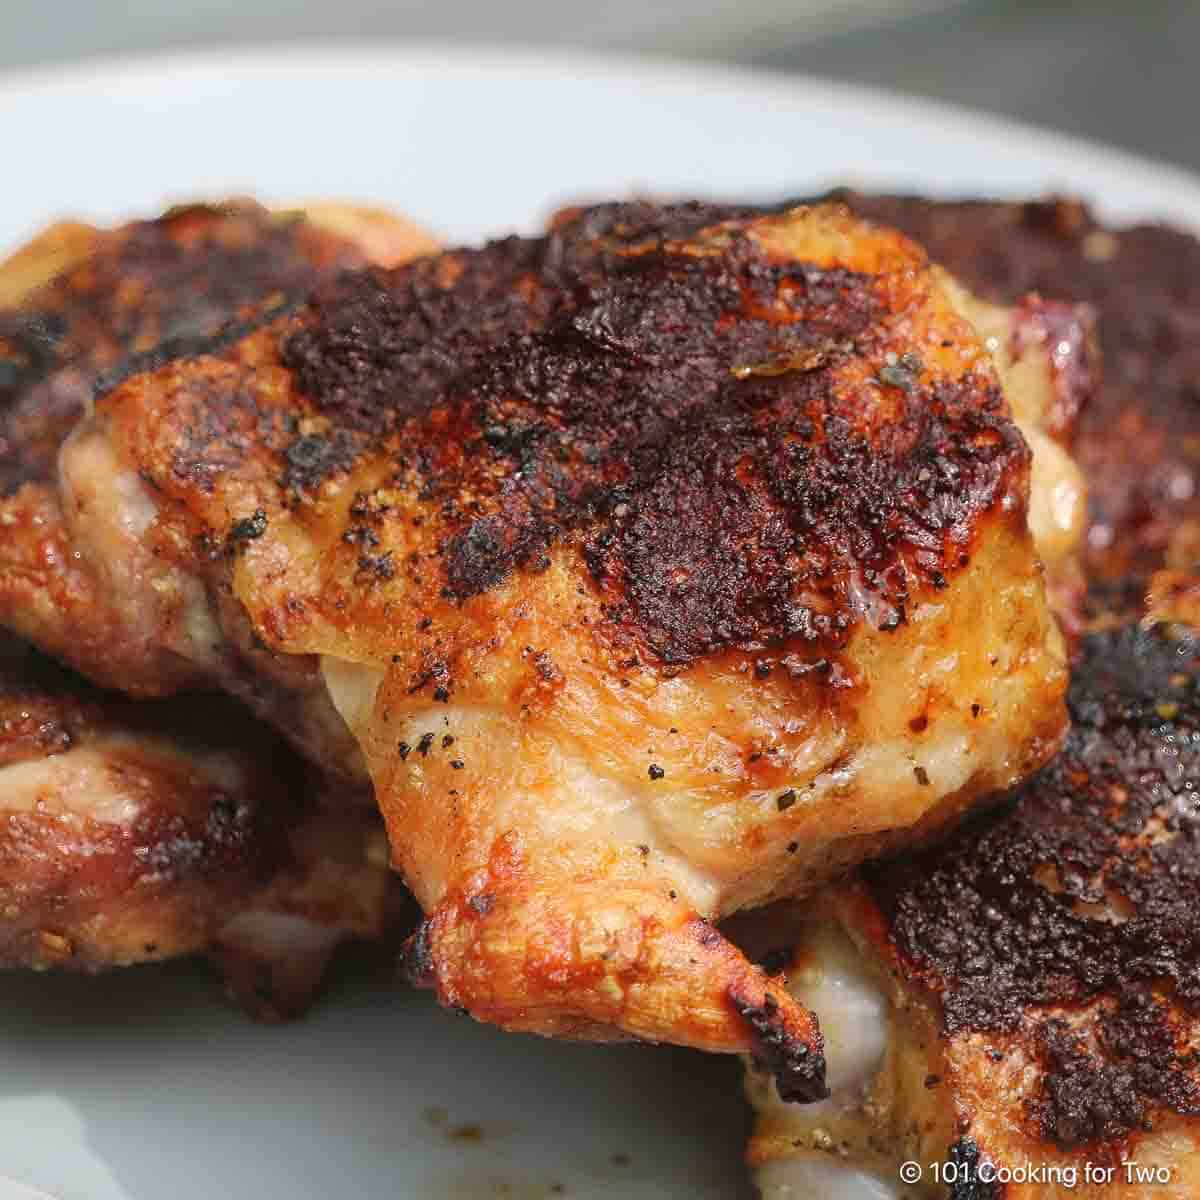 grilled chicken thigh with some char.